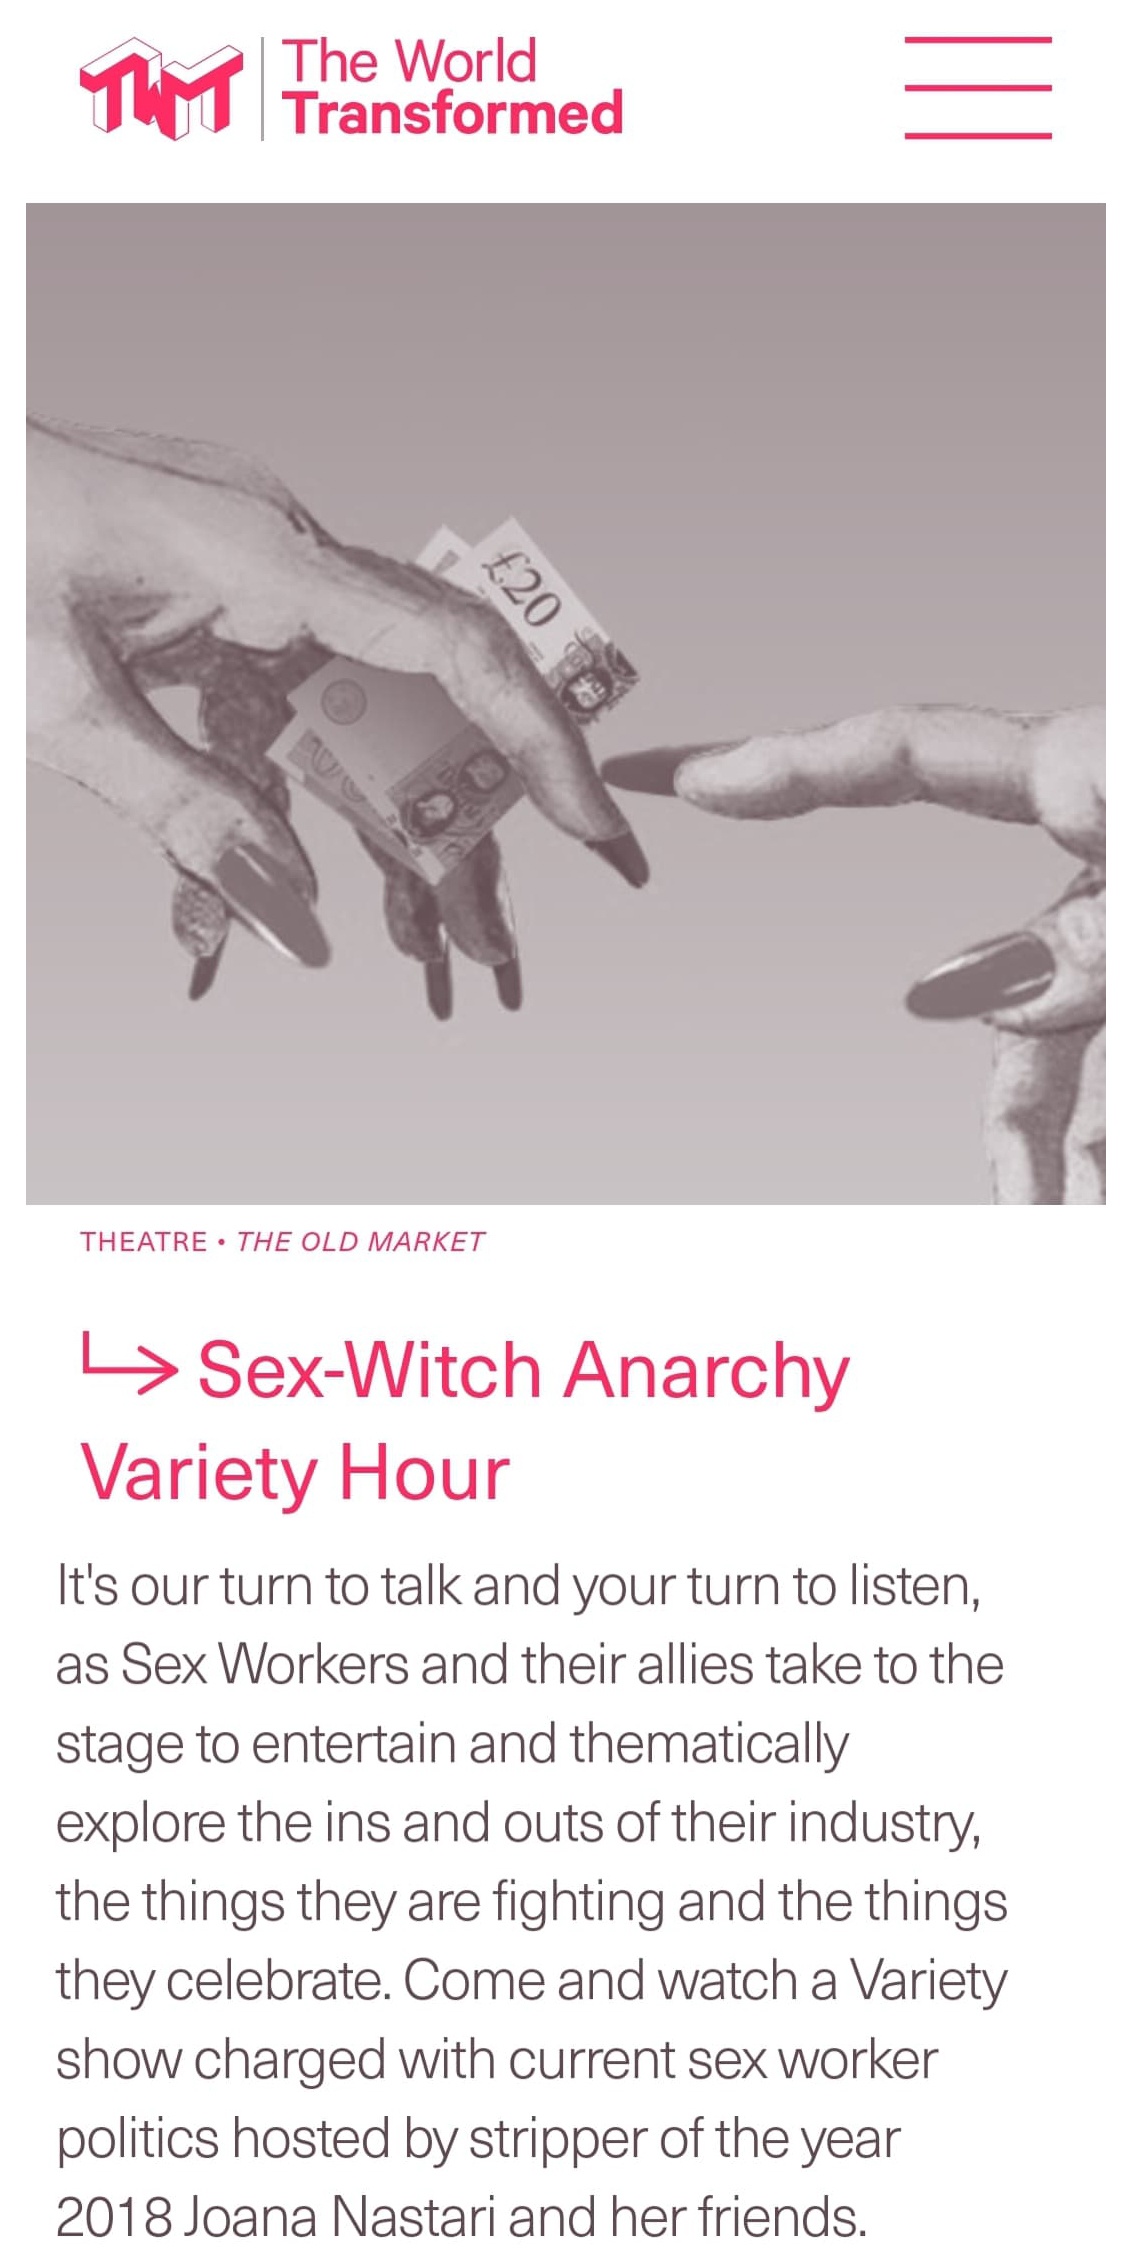 The 'Sex Witch Anarchy Variety Hour' took place on Monday September 23, another event showing the strong focus on sex work at the fringe.